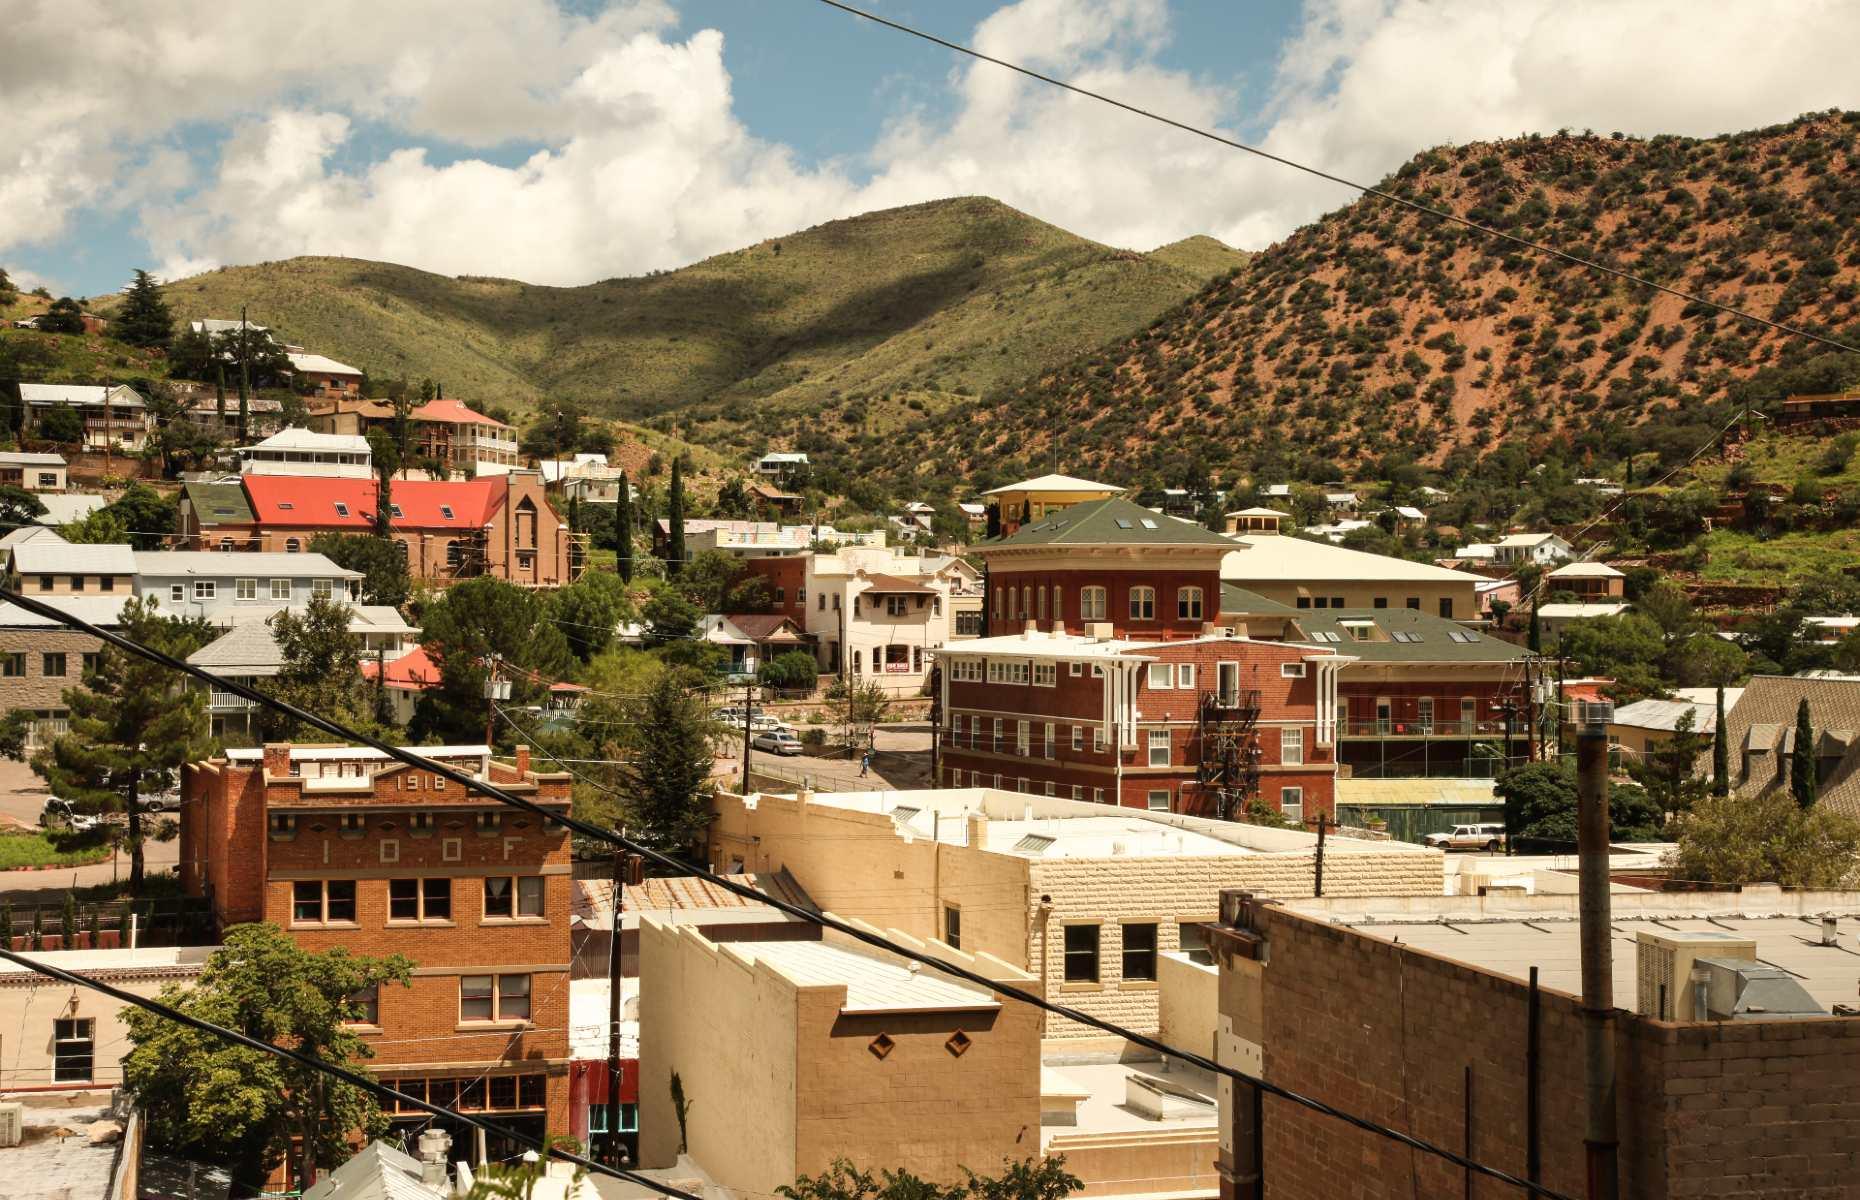 <p>This beautiful southeastern Arizona town has roots stretching back to the 19th century, when prospectors discovered copper, gold and silver in the surrounding Mule Mountains region. In 1880 the town of Bisbee was born, soon growing to be one of the largest in the area, with a population peaking at 20,000. Nowadays, the <a href="https://bisbeemuseum.org/">Bisbee Mining and Historical Museum</a> offers a fascinating glimpse into the past, while many of its preserved 19th-century buildings have been transformed into art galleries, bars and restaurants.</p>